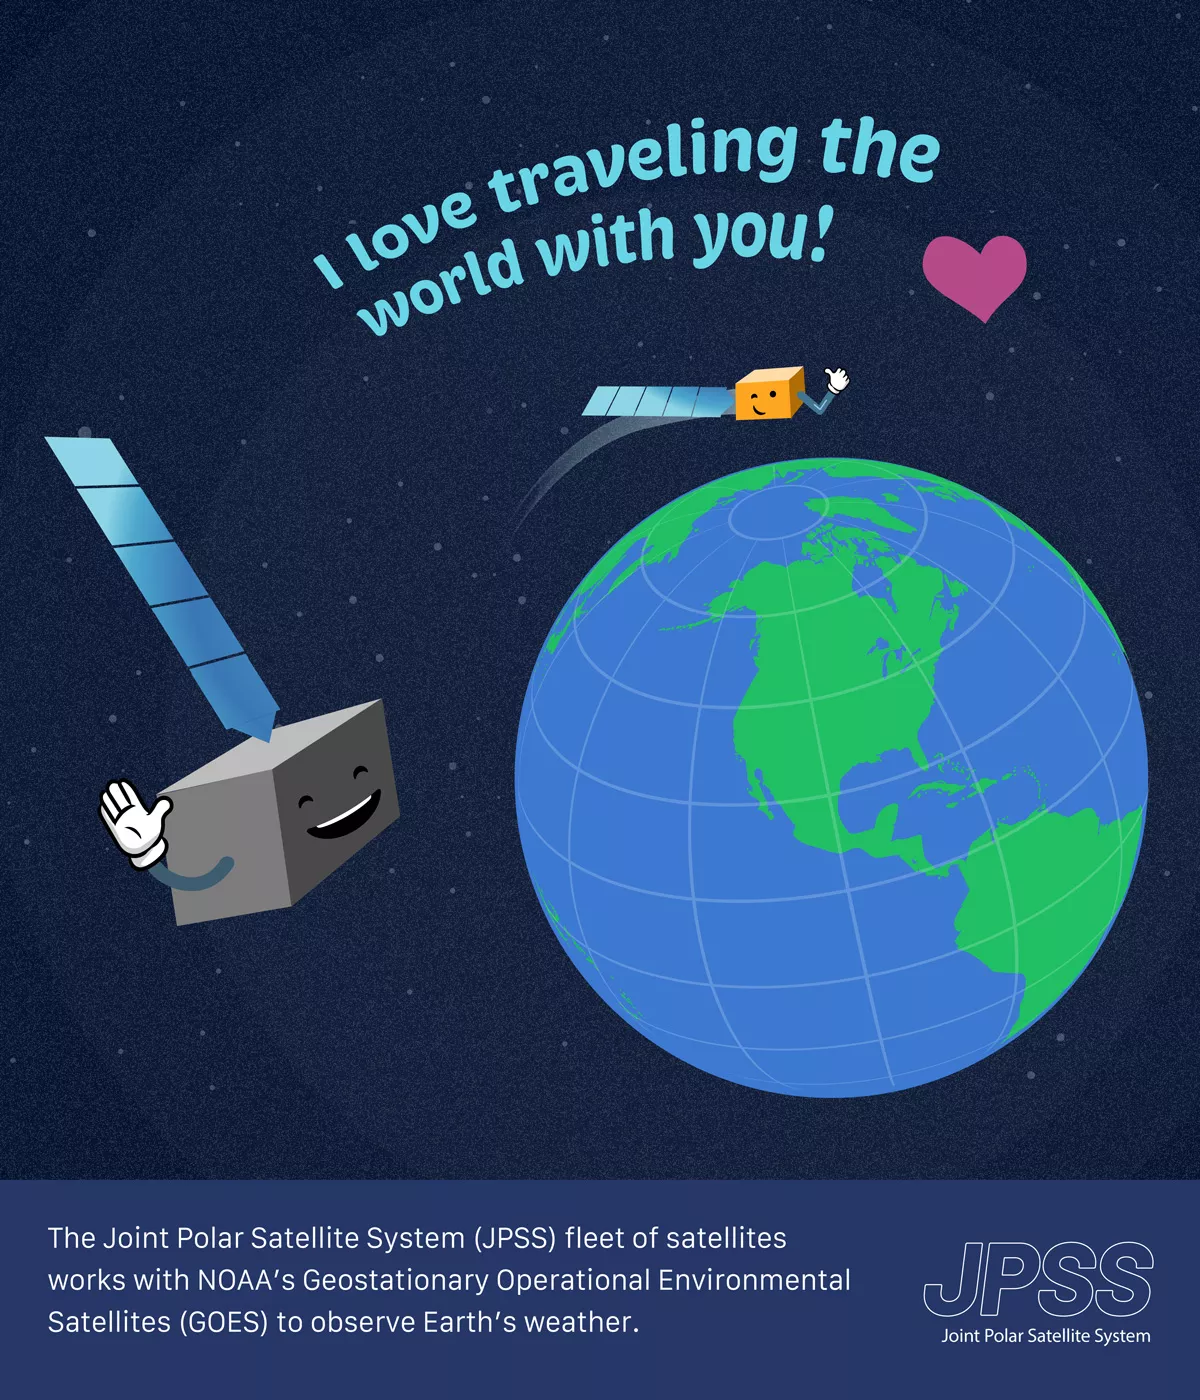 Whimsical valentine card illustration of 2 cartoon satellites over the Earth, waving to each other. Description text below reads, "The Joint Polar Satellite System (JPSS) fleet of satellites works with NOAA's Geostationary Operational Environmental Satellites (GOES) to observe Earth's weather."